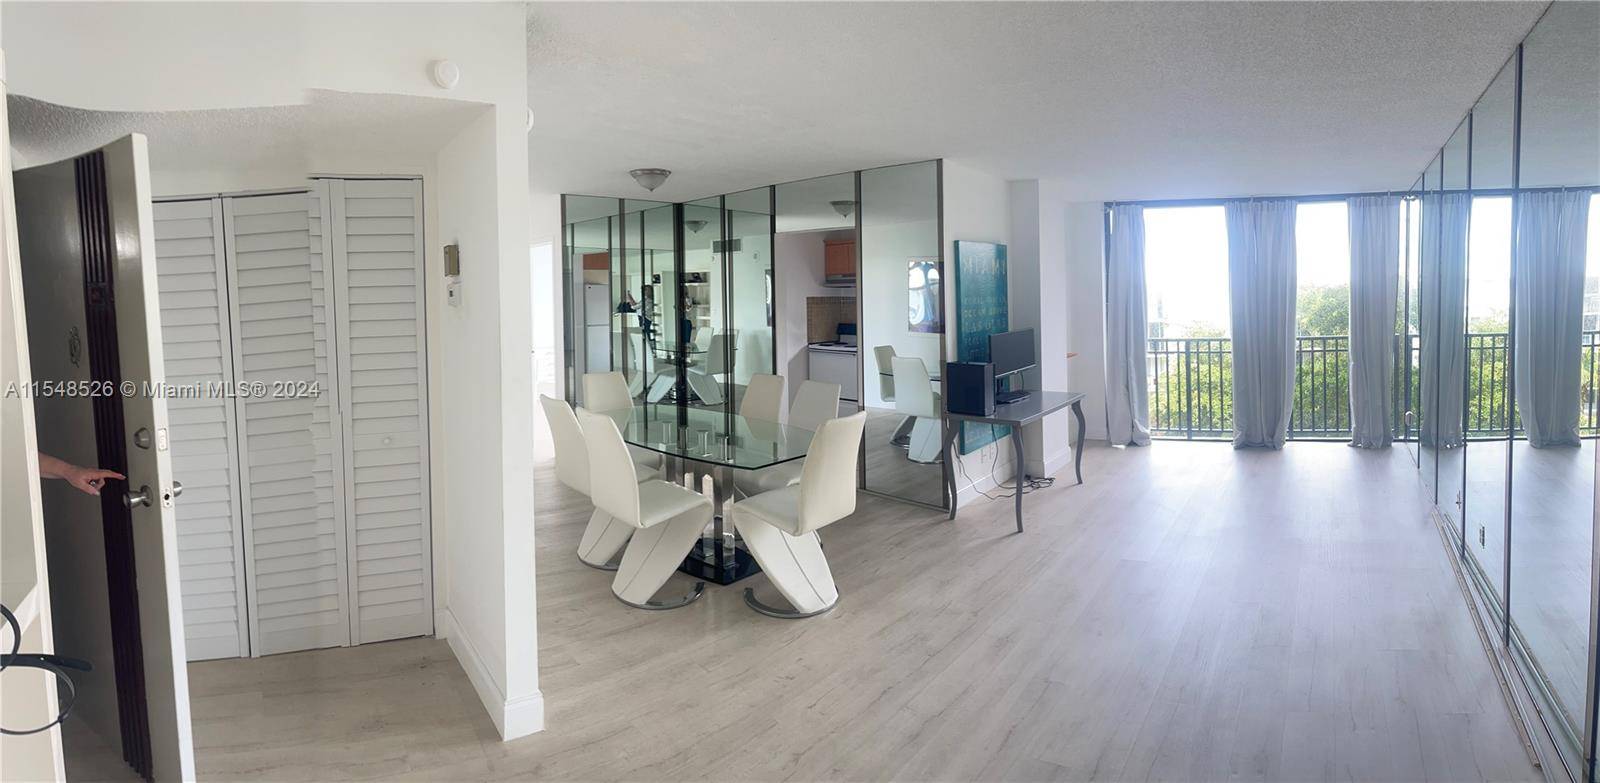 Sunny Isles Beach, best schools, walking distance to the beach, shopping and restaurants.